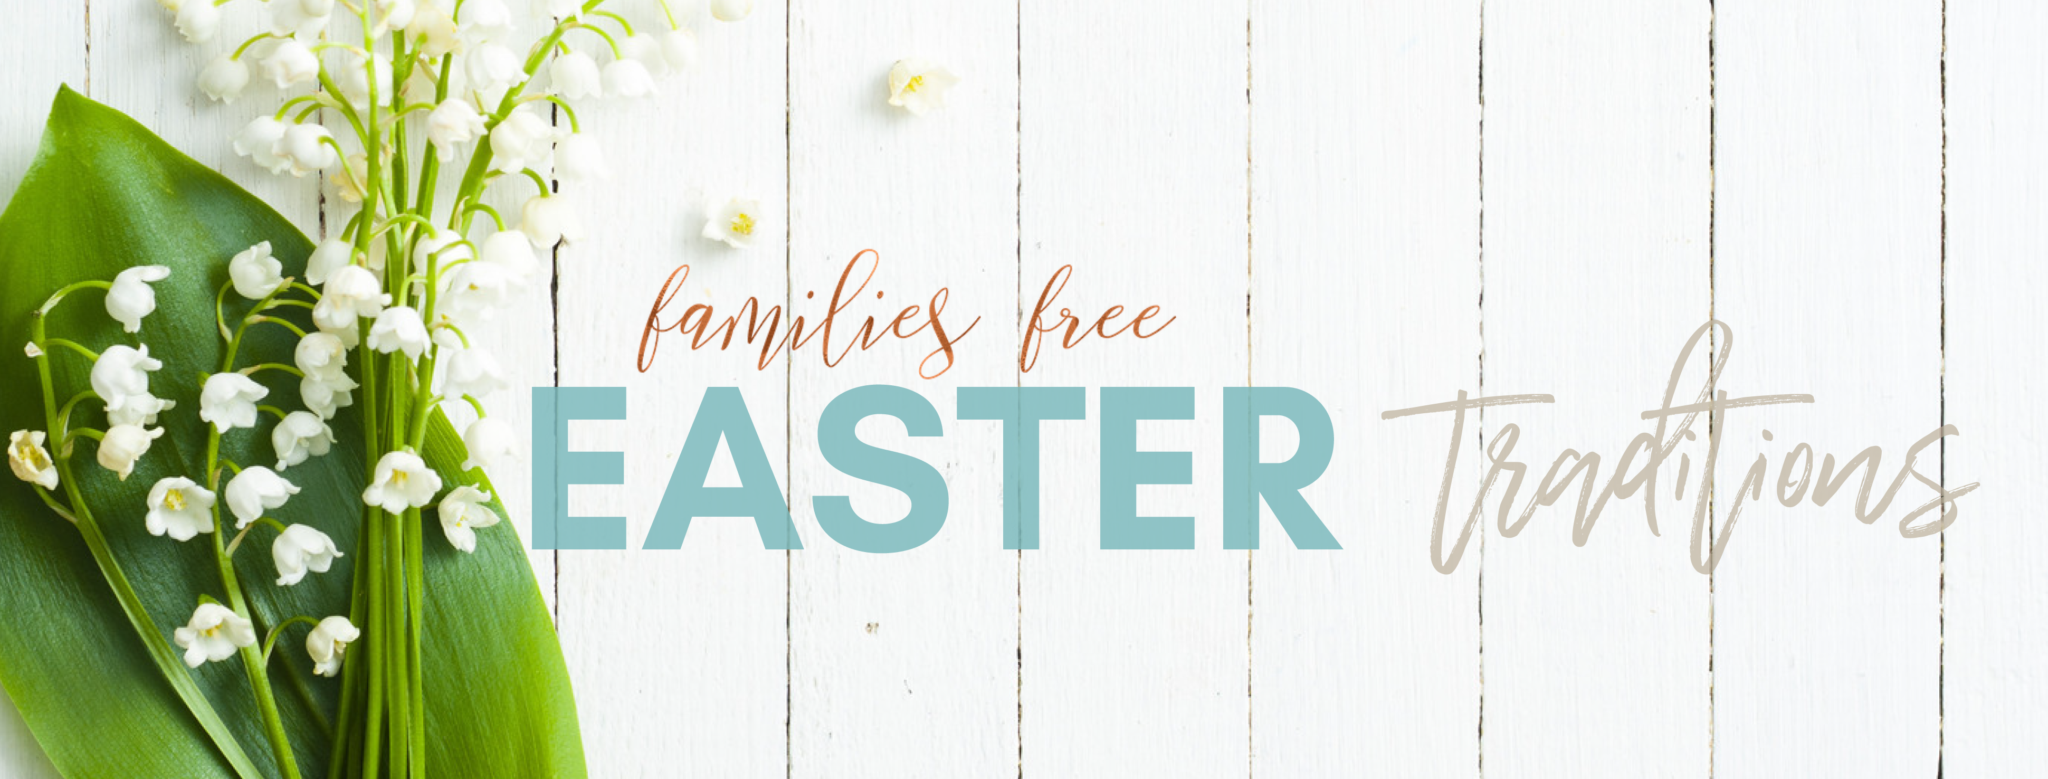 Easter, Love, And Restoration